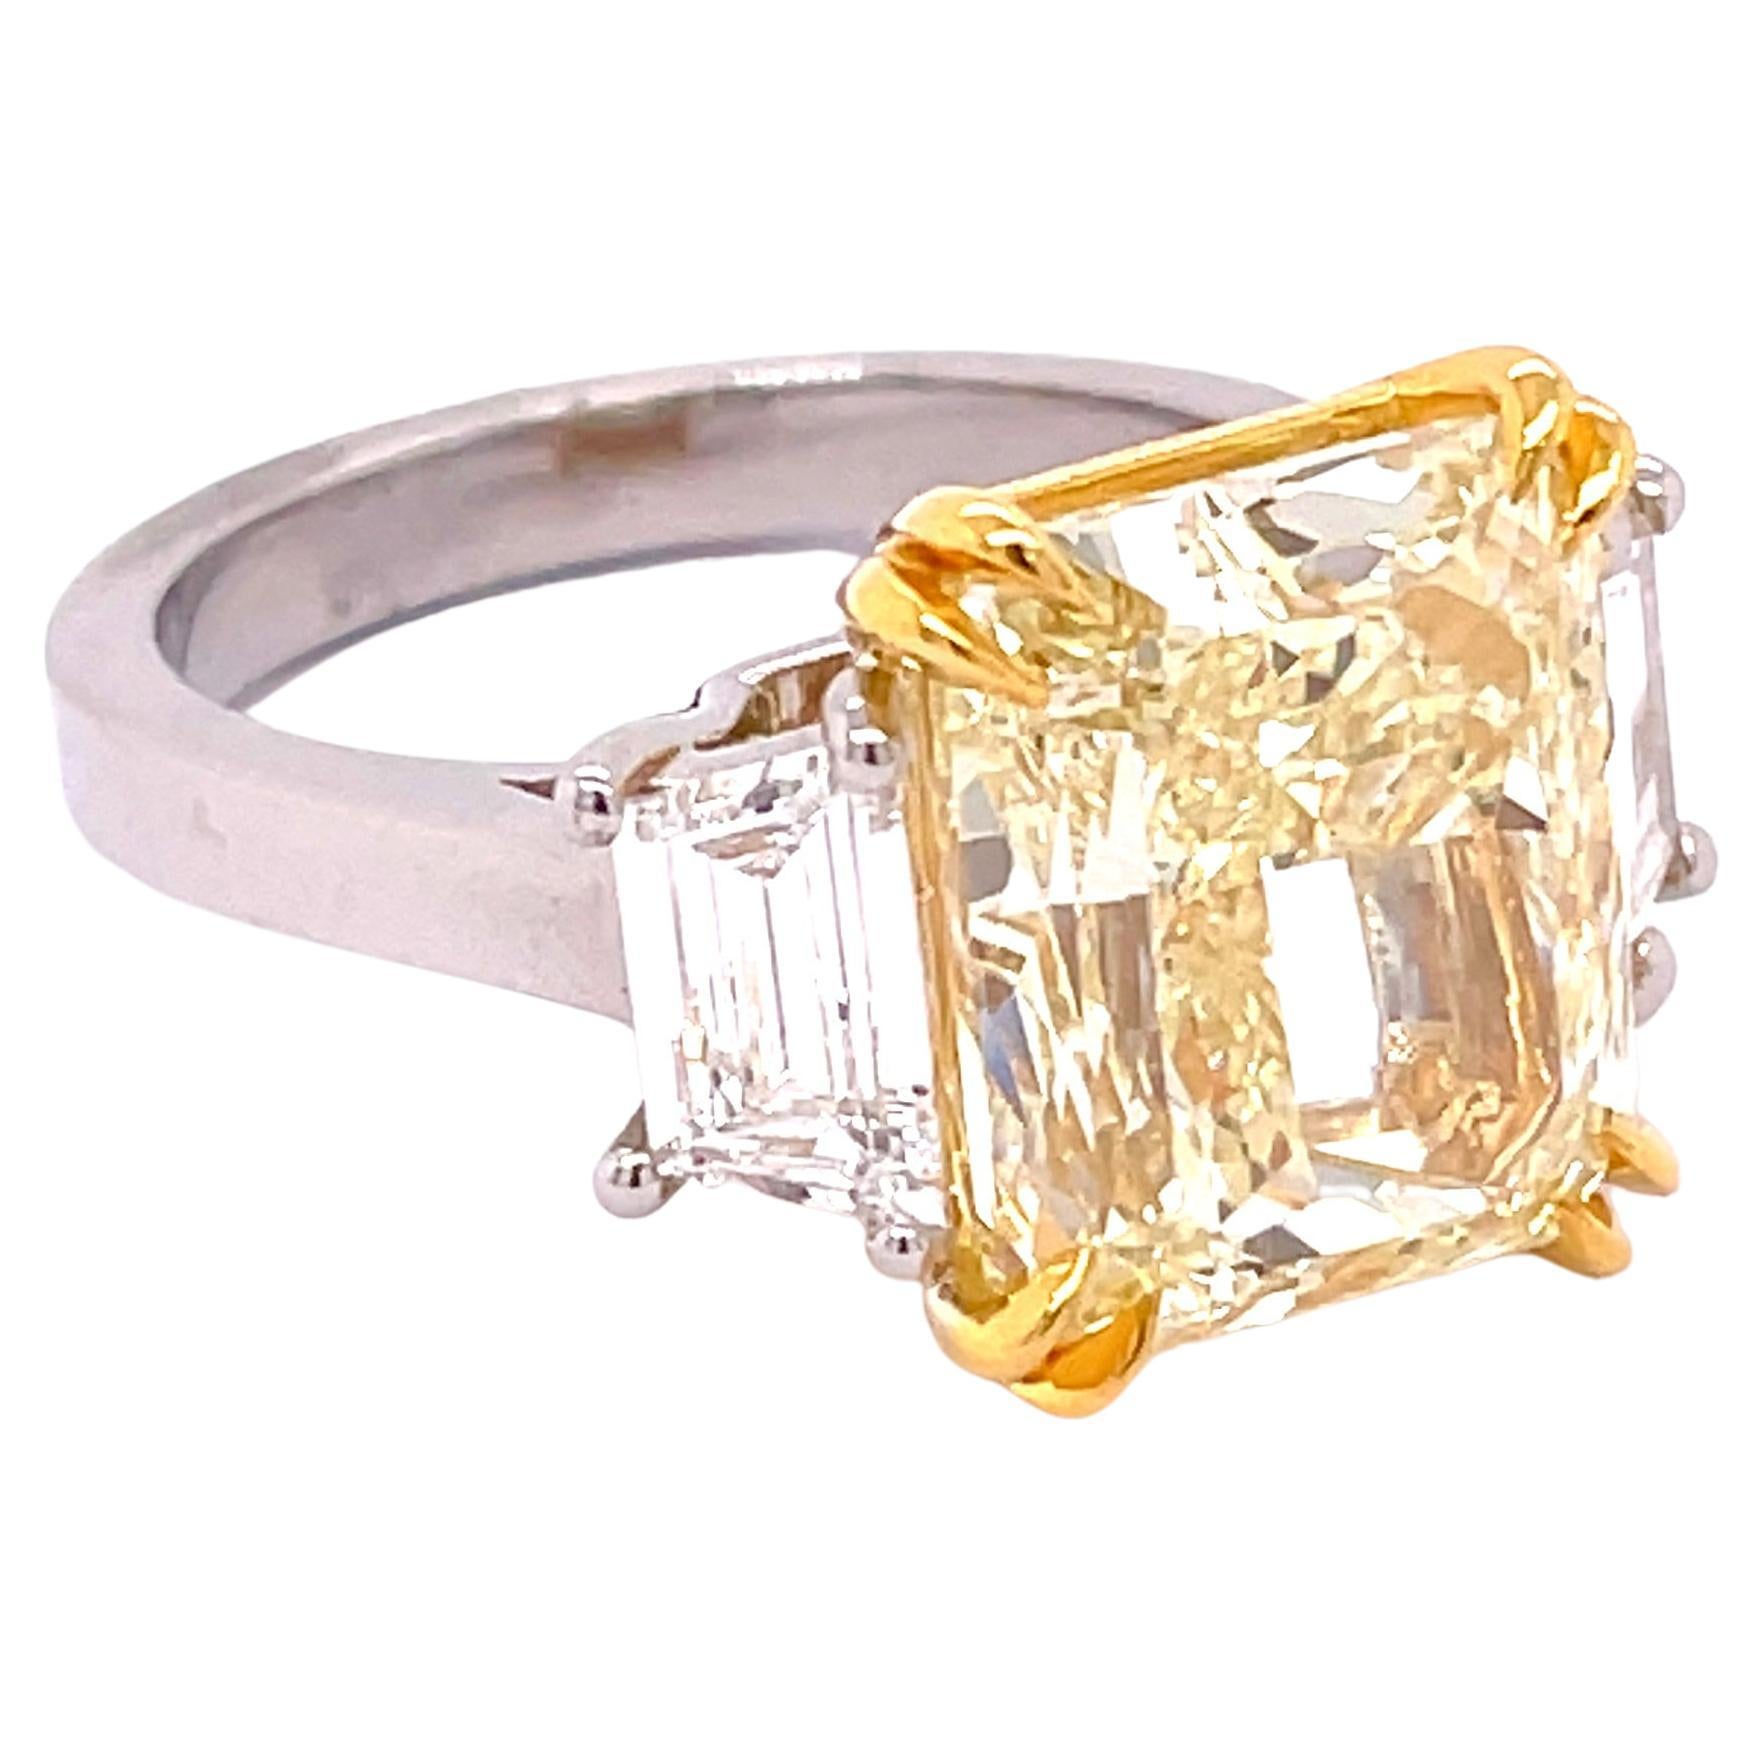 Spectacular GIA Certified 8.03 Fancy Light Yellow Radiant Cut Engagement Ring 

Setting:
Platinum/ 18K Yellow

Center Stone:
11.85 x 9.92 x 6.92 mm 8.03ct Fancy Light Yellow
Cut: Radiant
Clarity: VS1
Polish: Excellent
Symmetry: Excellent

Side